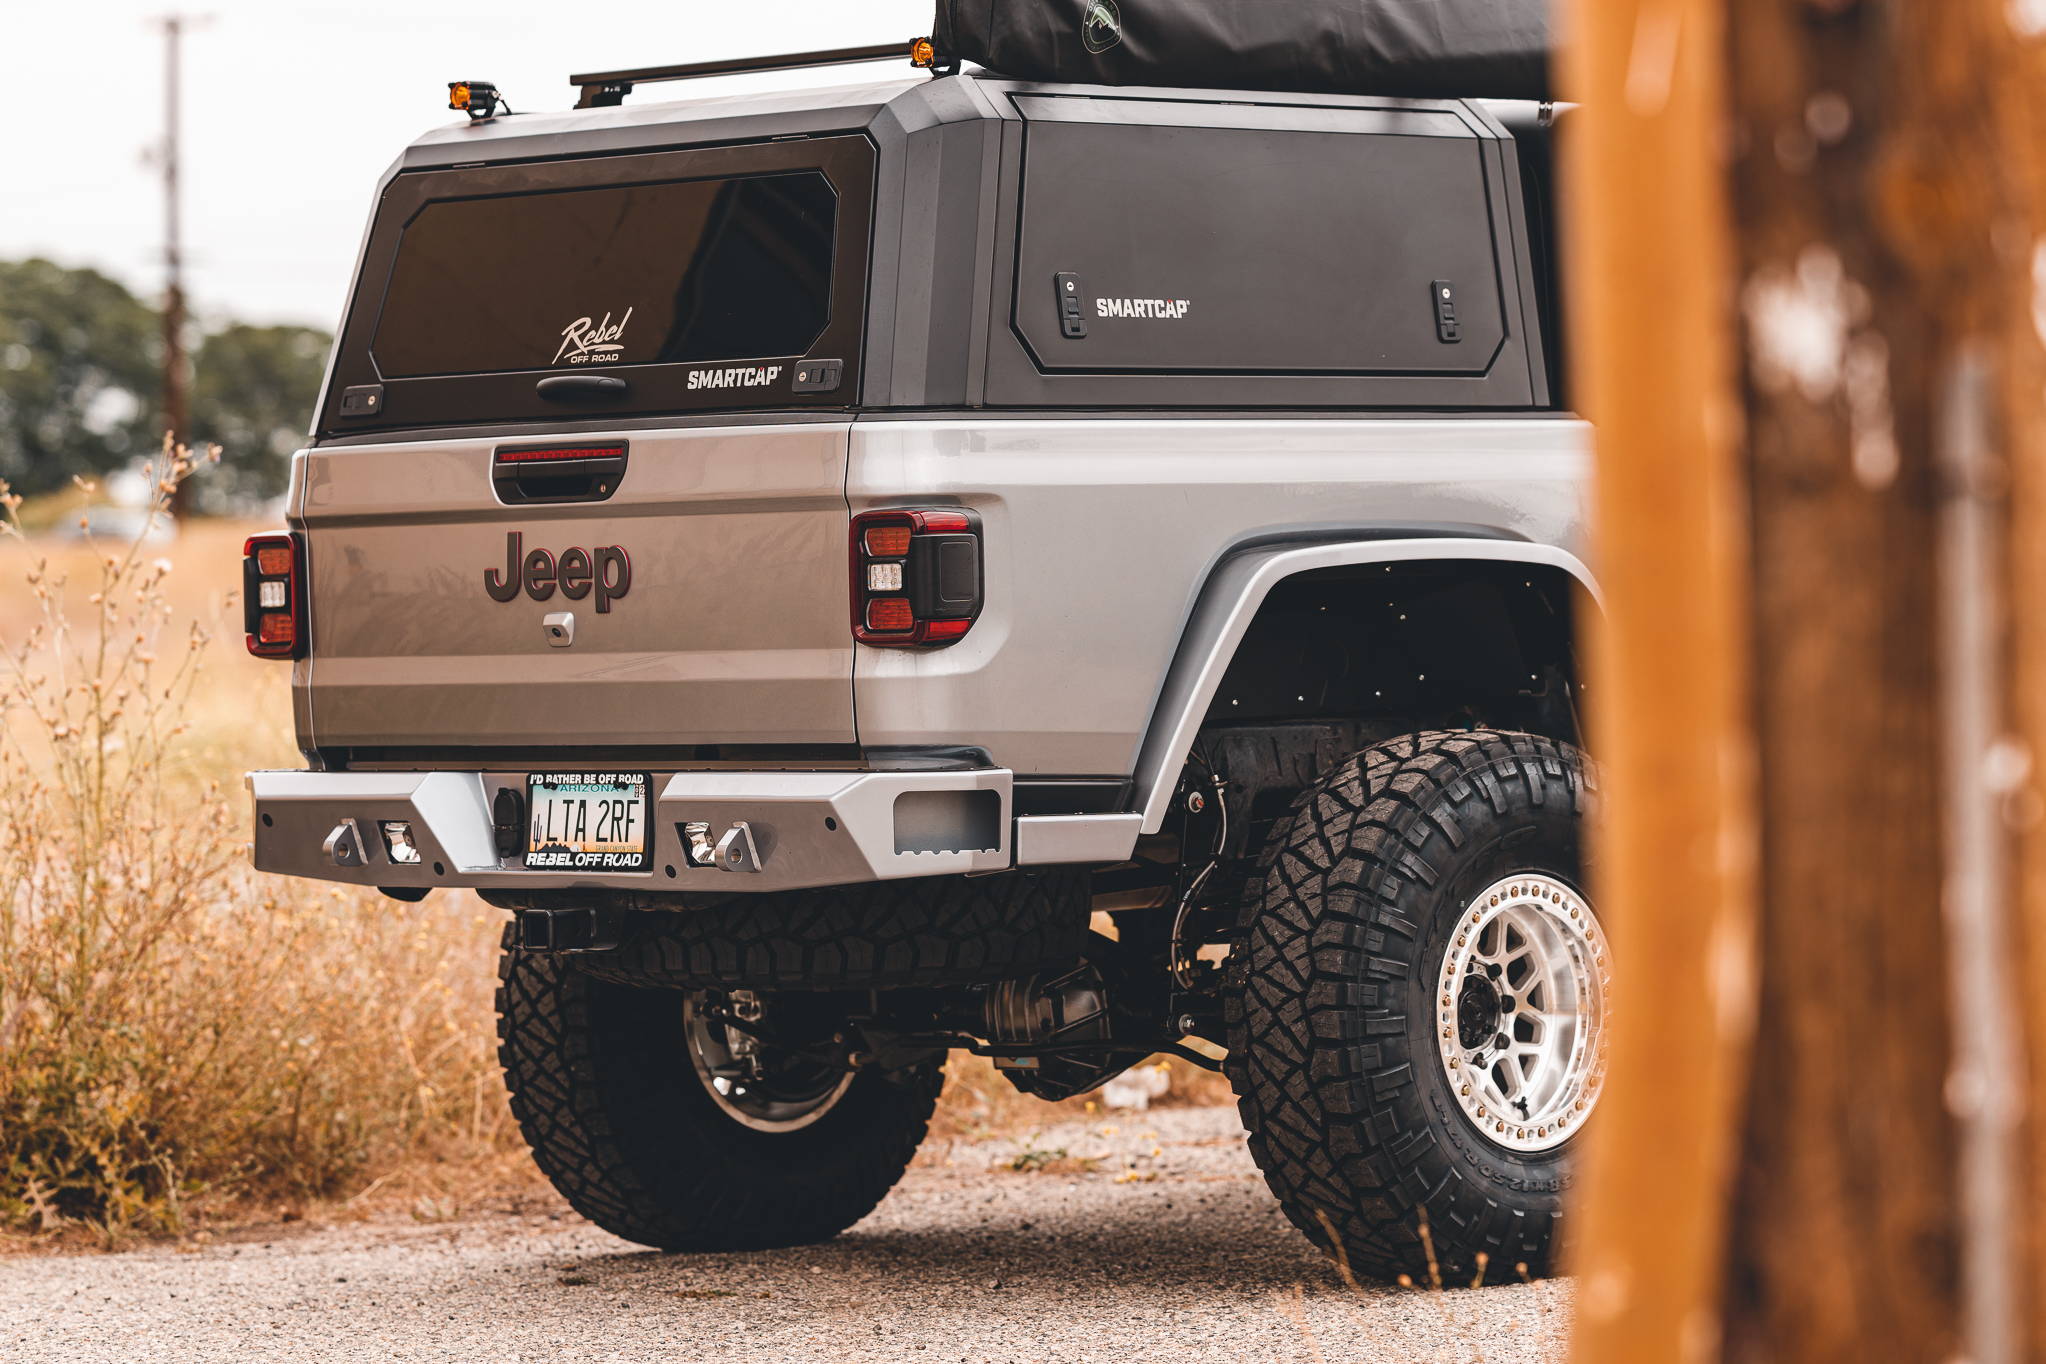 The Ultimate Off-Road Warrior: Rebel Off Road's Jeep Gladiator with SmartCap and Recon Coilover Kit